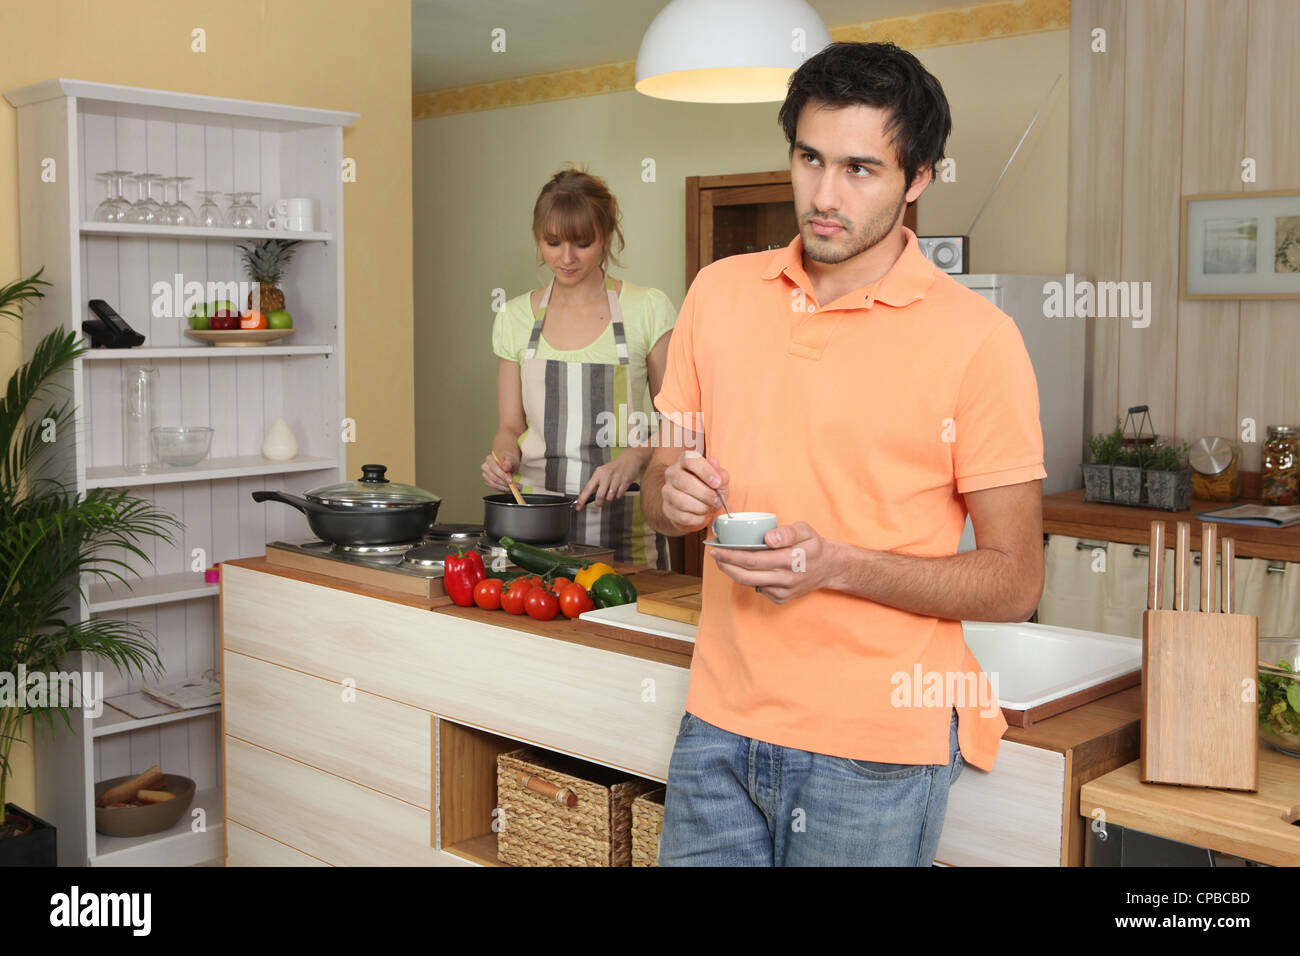 Couple in a kitchen Stock Photo